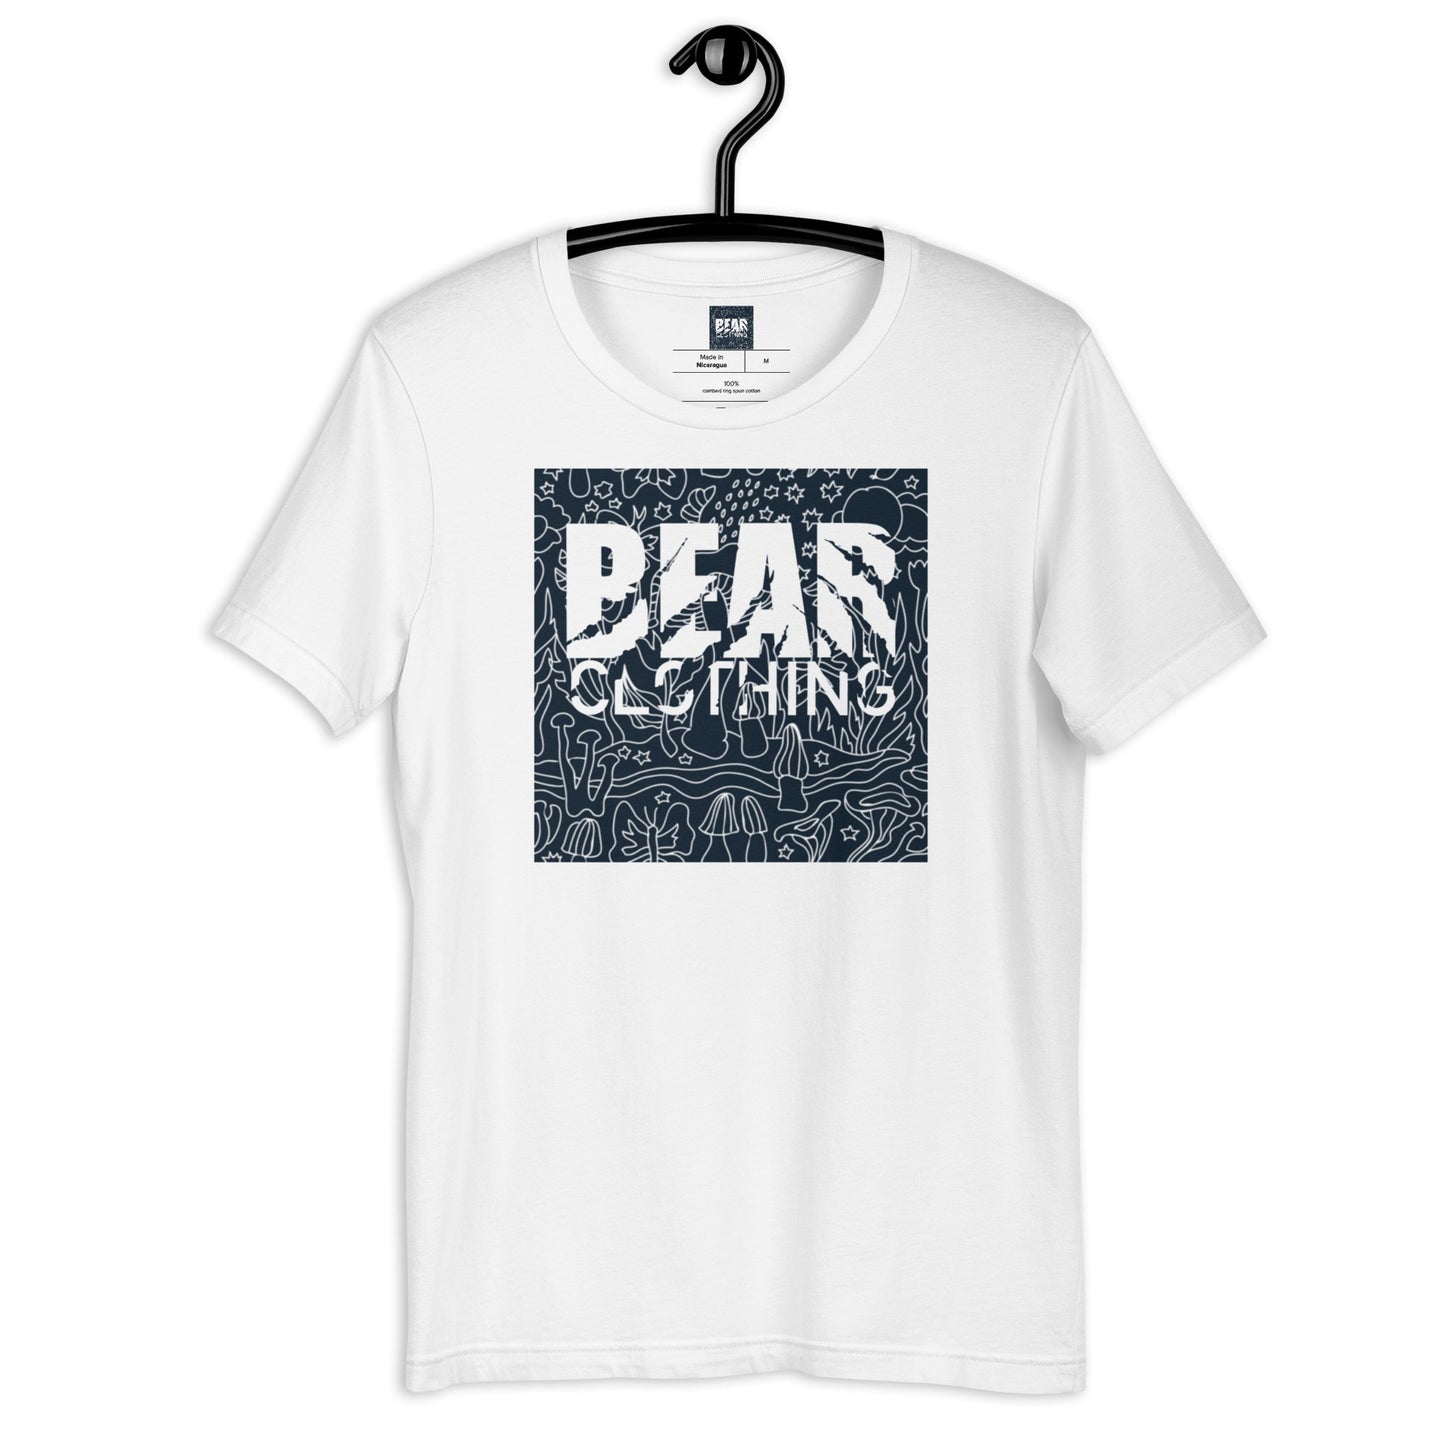 Unisex Matching We Cooling Special Edition Premium Tee.. - Bearclothing